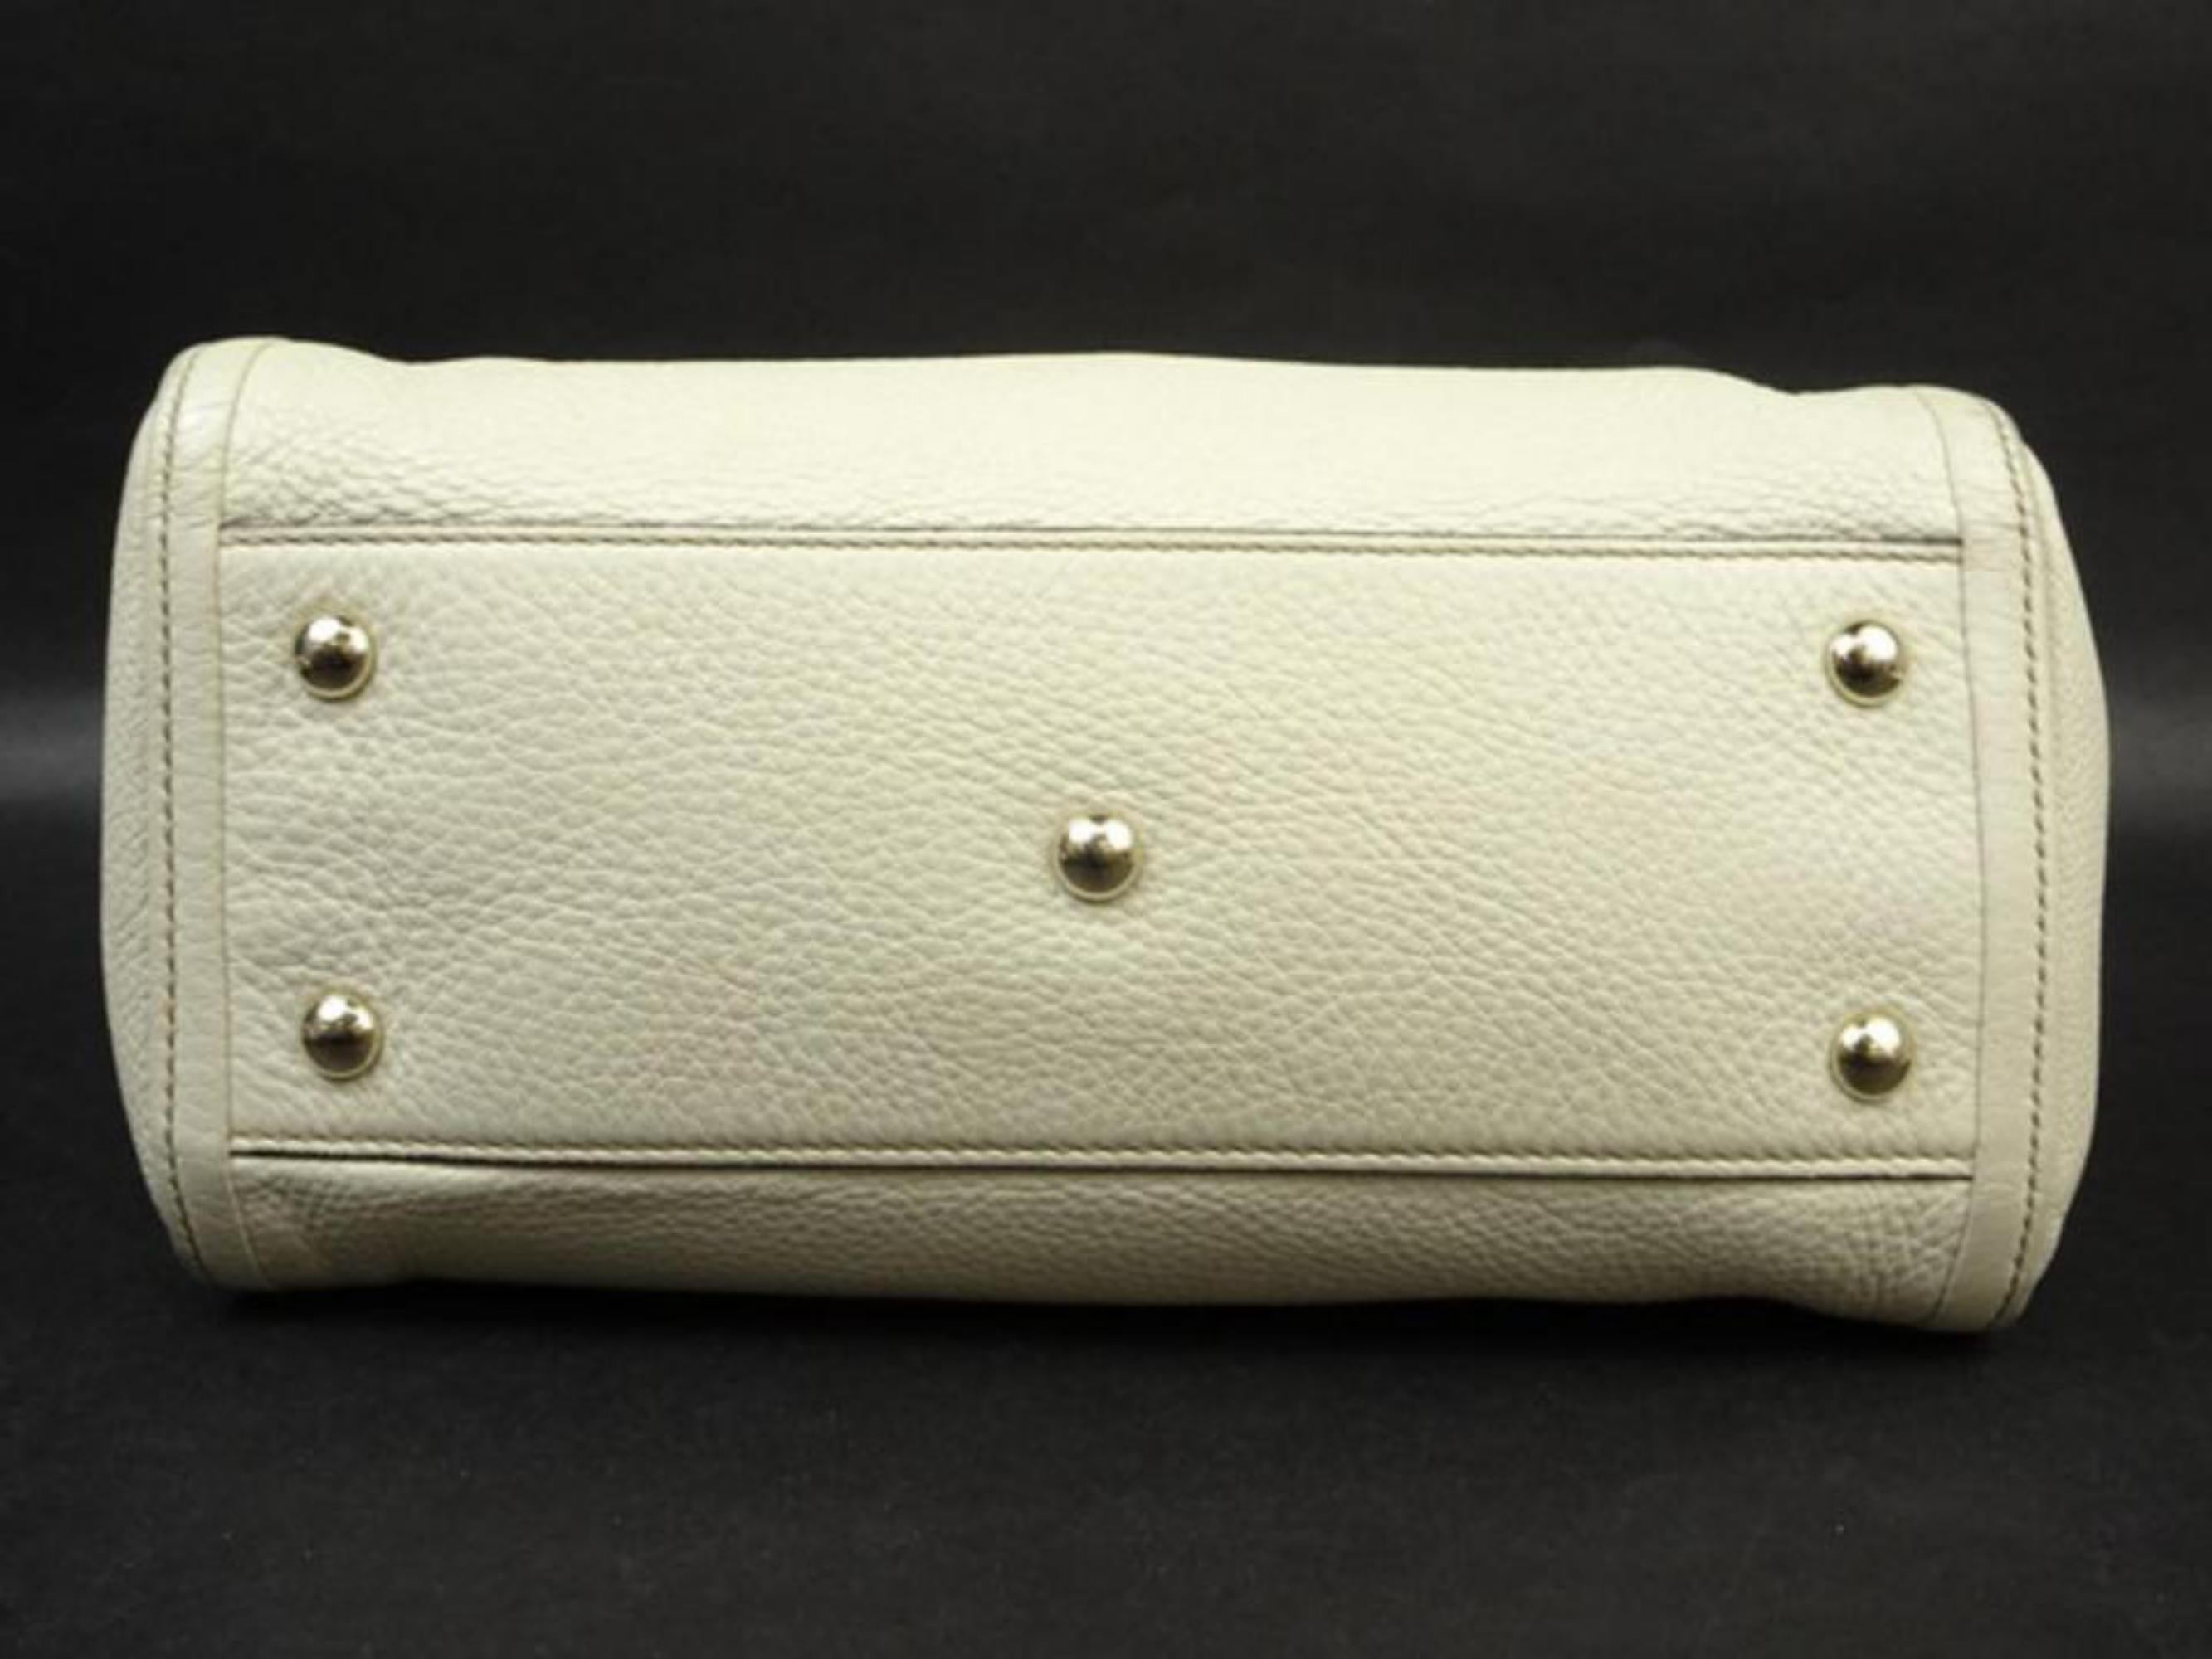 Gucci Soho Convertible 219069 Ivory Leather Shoulder Bag For Sale 2